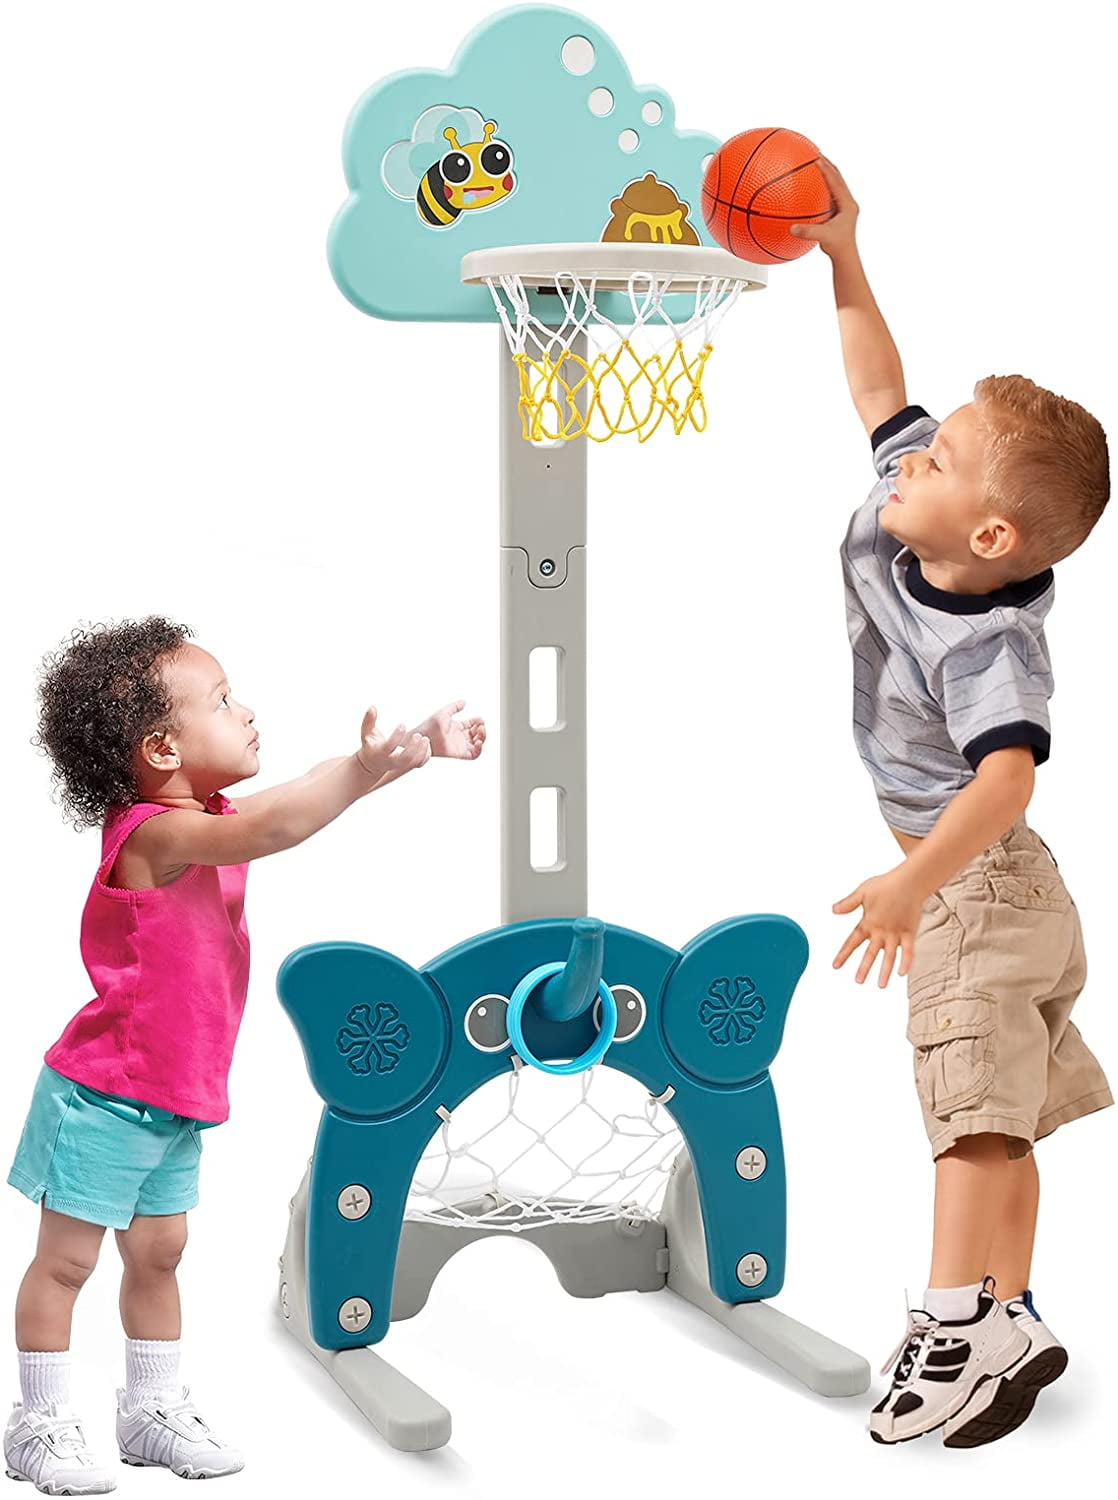 Ealing Basketball Hoop for Kids 4 in 1 Sports Activity Center Grow-to ...